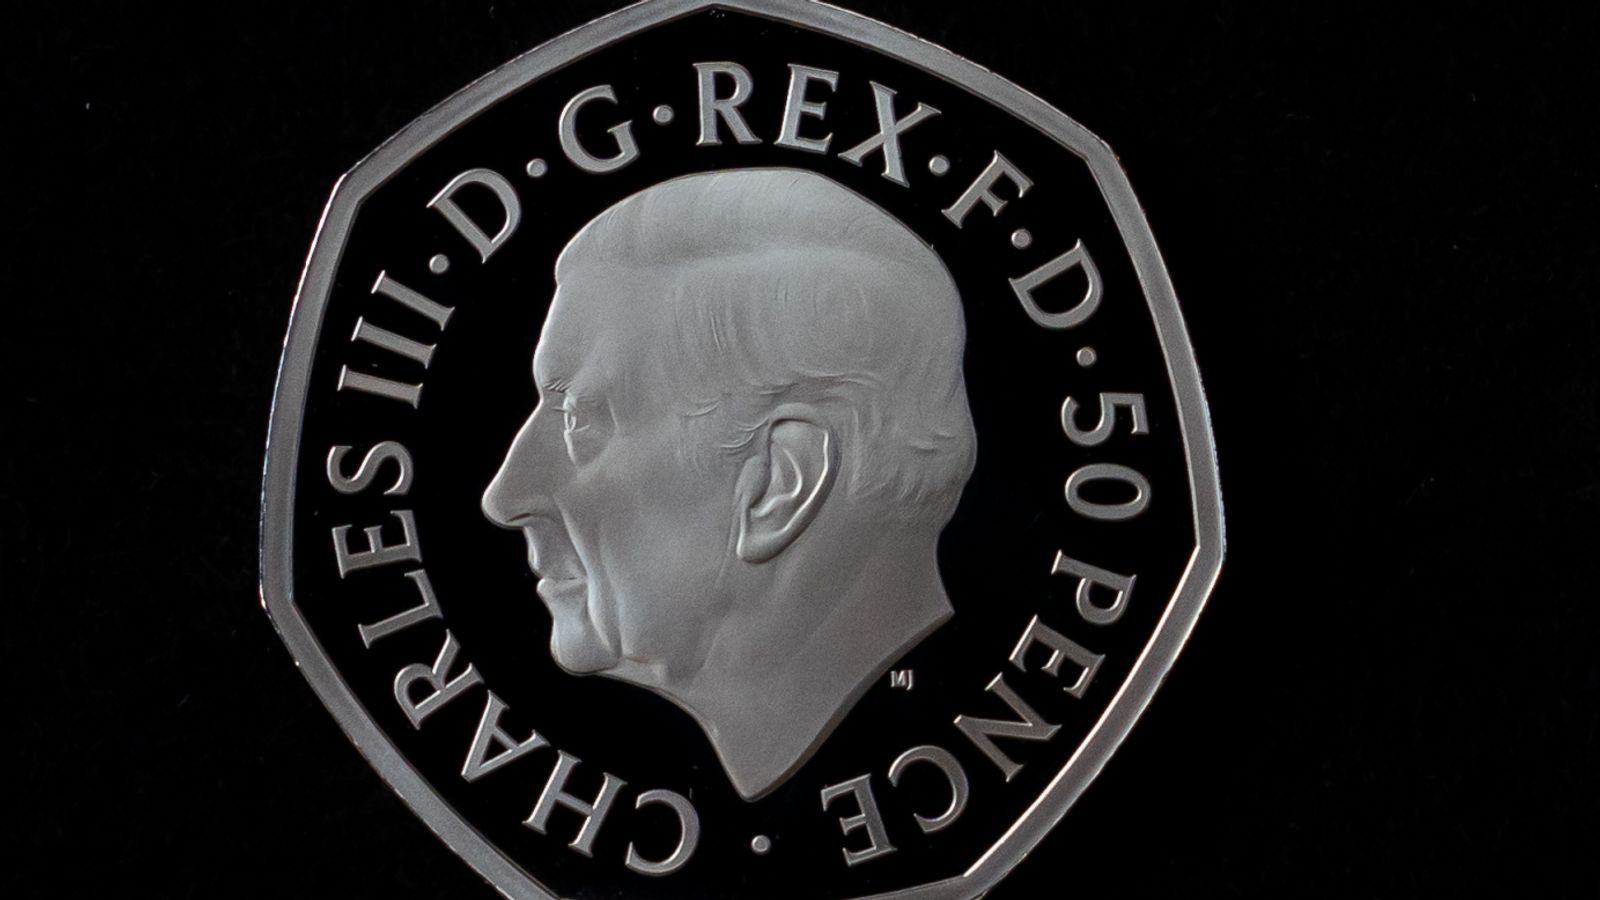 Coins featuring portrait of King Charles unveiled as Royal Mint